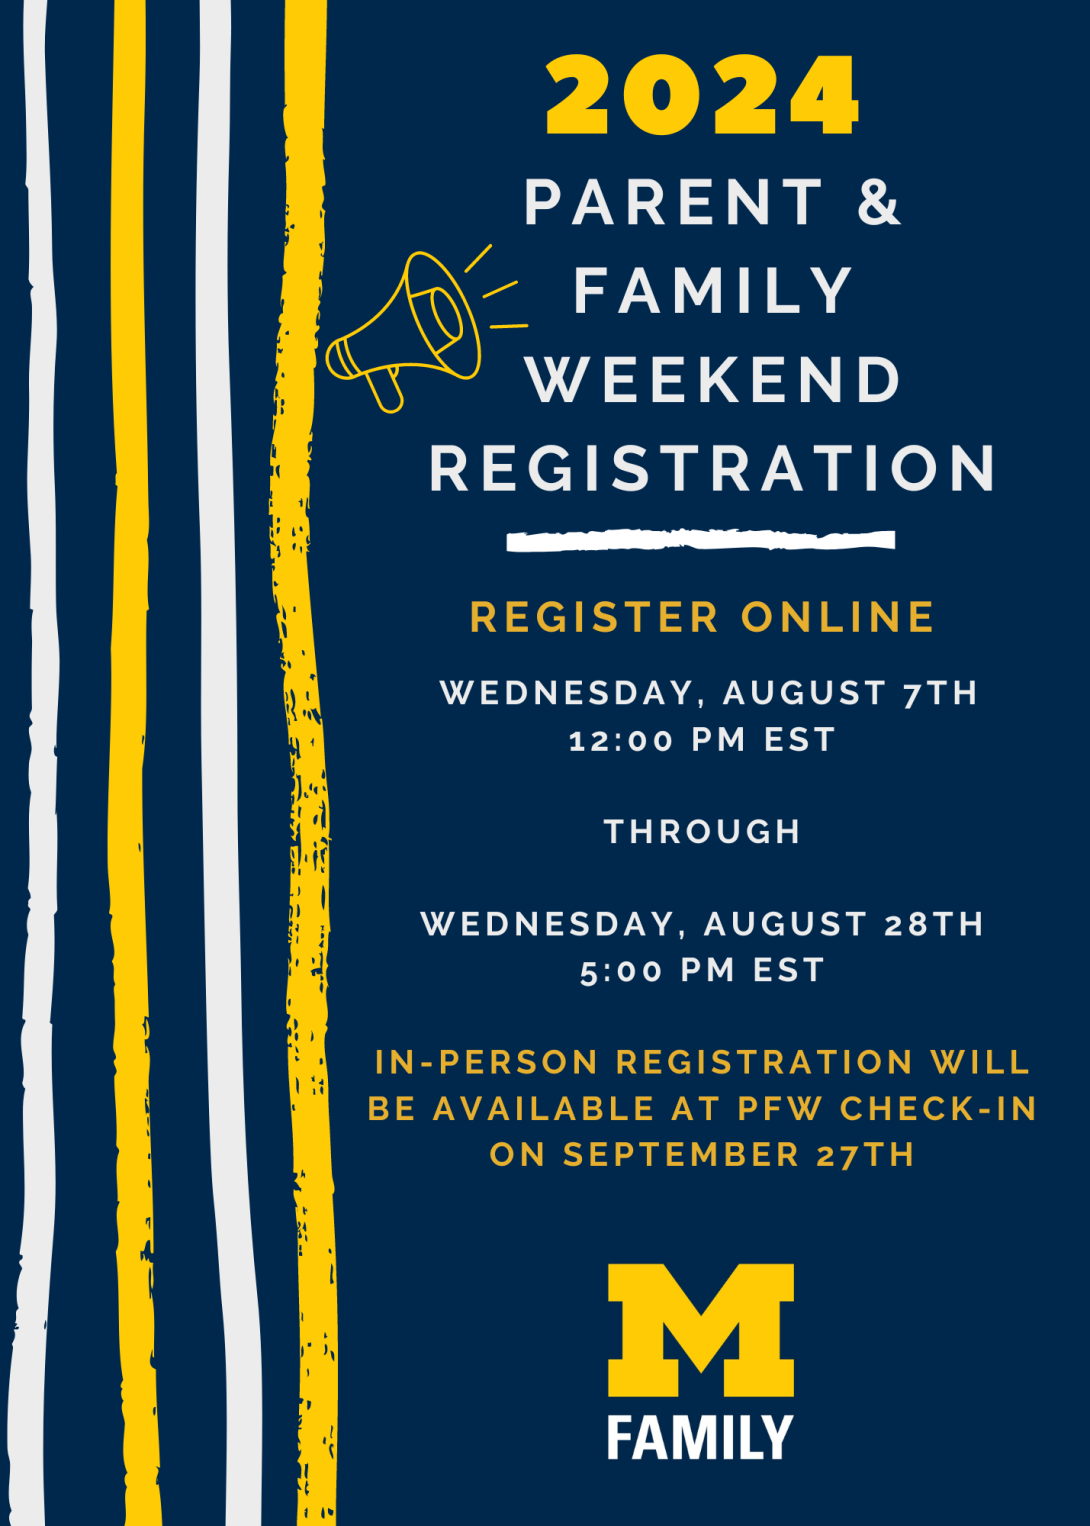 Advance registration will open online Wednesday, August 7, 2024 at noon EST, and continue through Wednesday, August 25, 2024 at 5:00 PM EST.  In-person registration will be available at MFW Check-in on September 27th.  A link to the live registration page will be available at noon EST on August 7, 2024. 